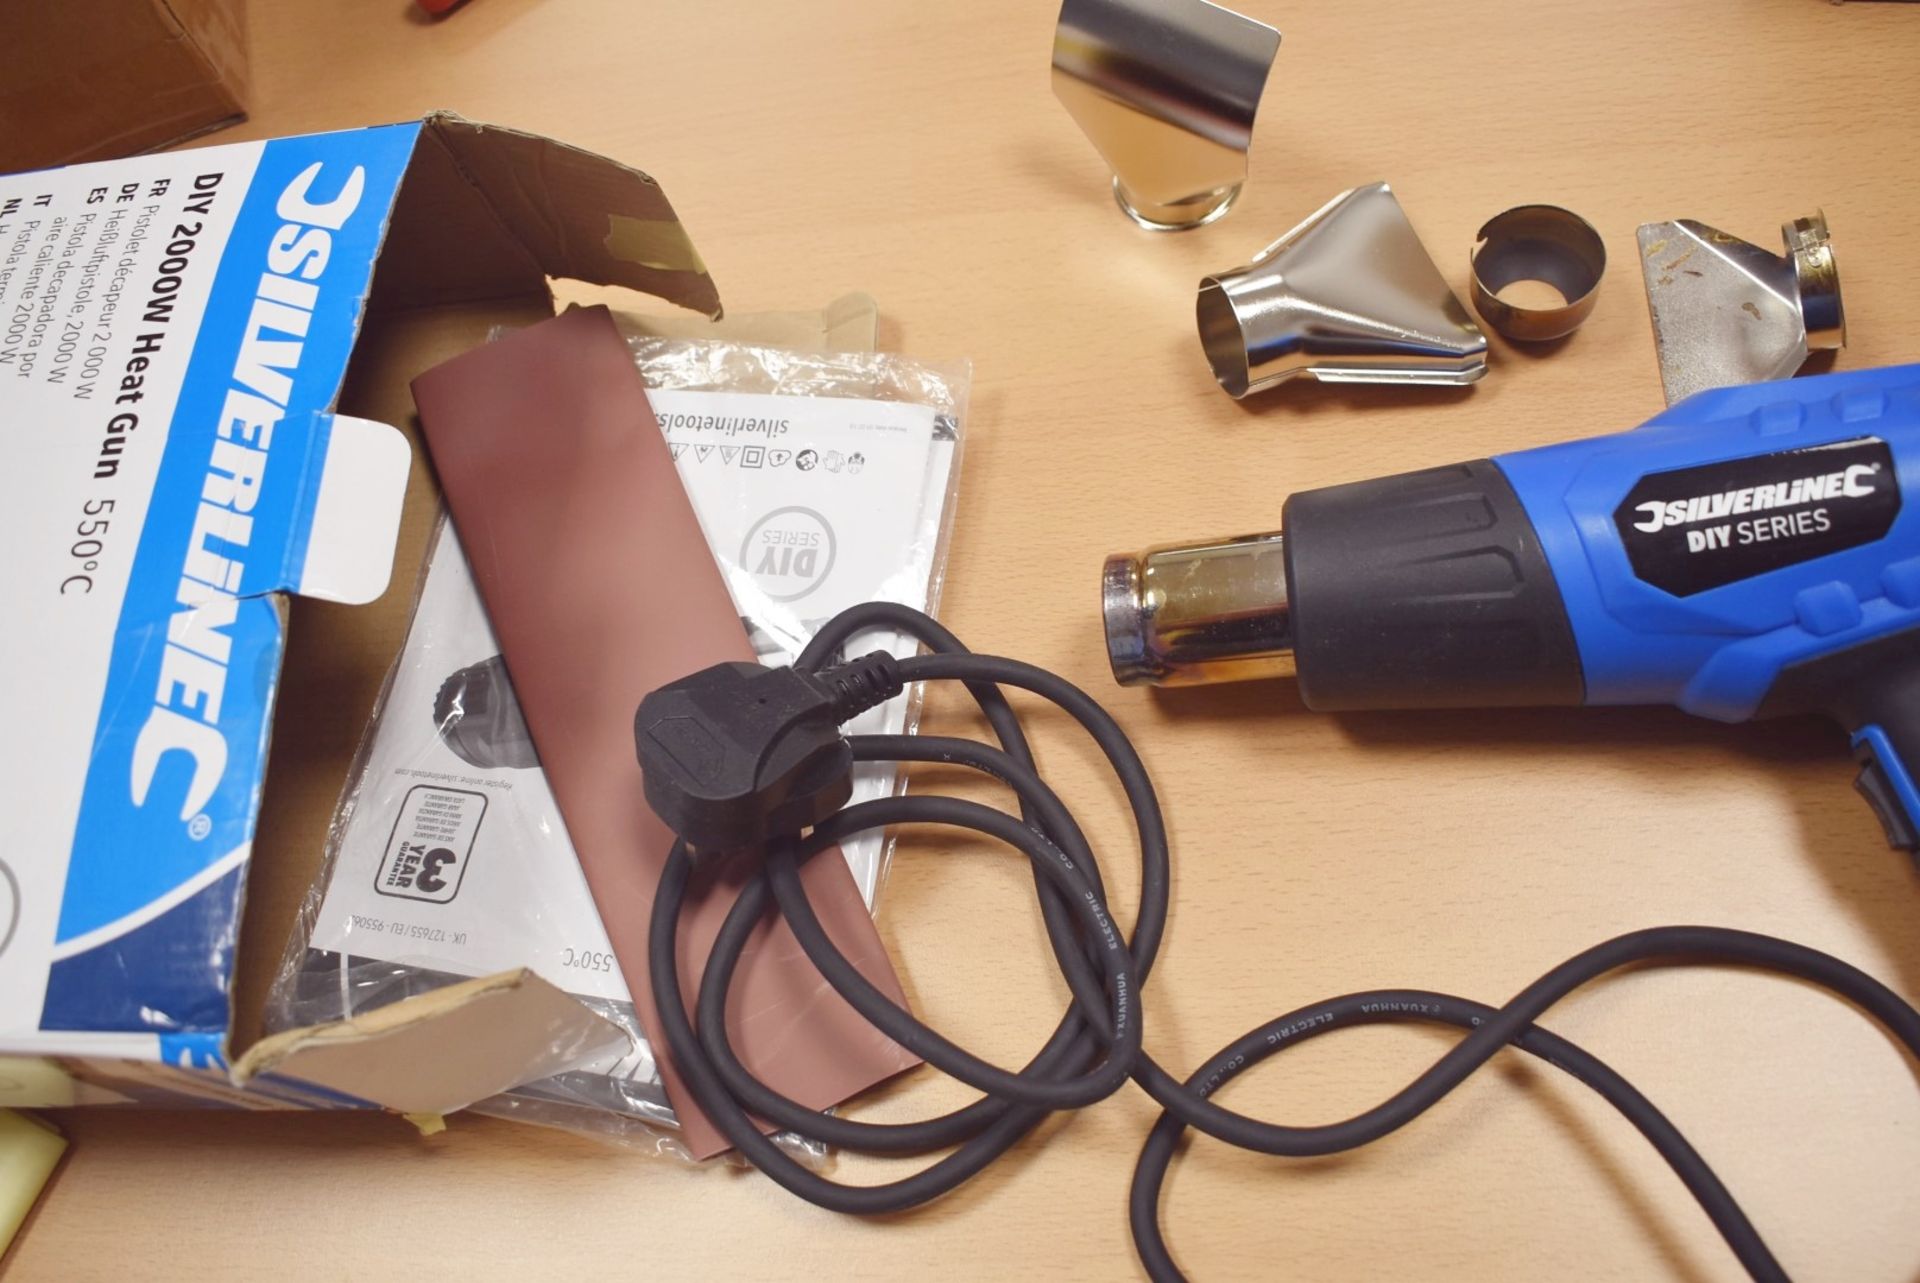 1 x Silverline DIY 200w 550c Heat Gun - Boxed With Accessories - Image 4 of 6